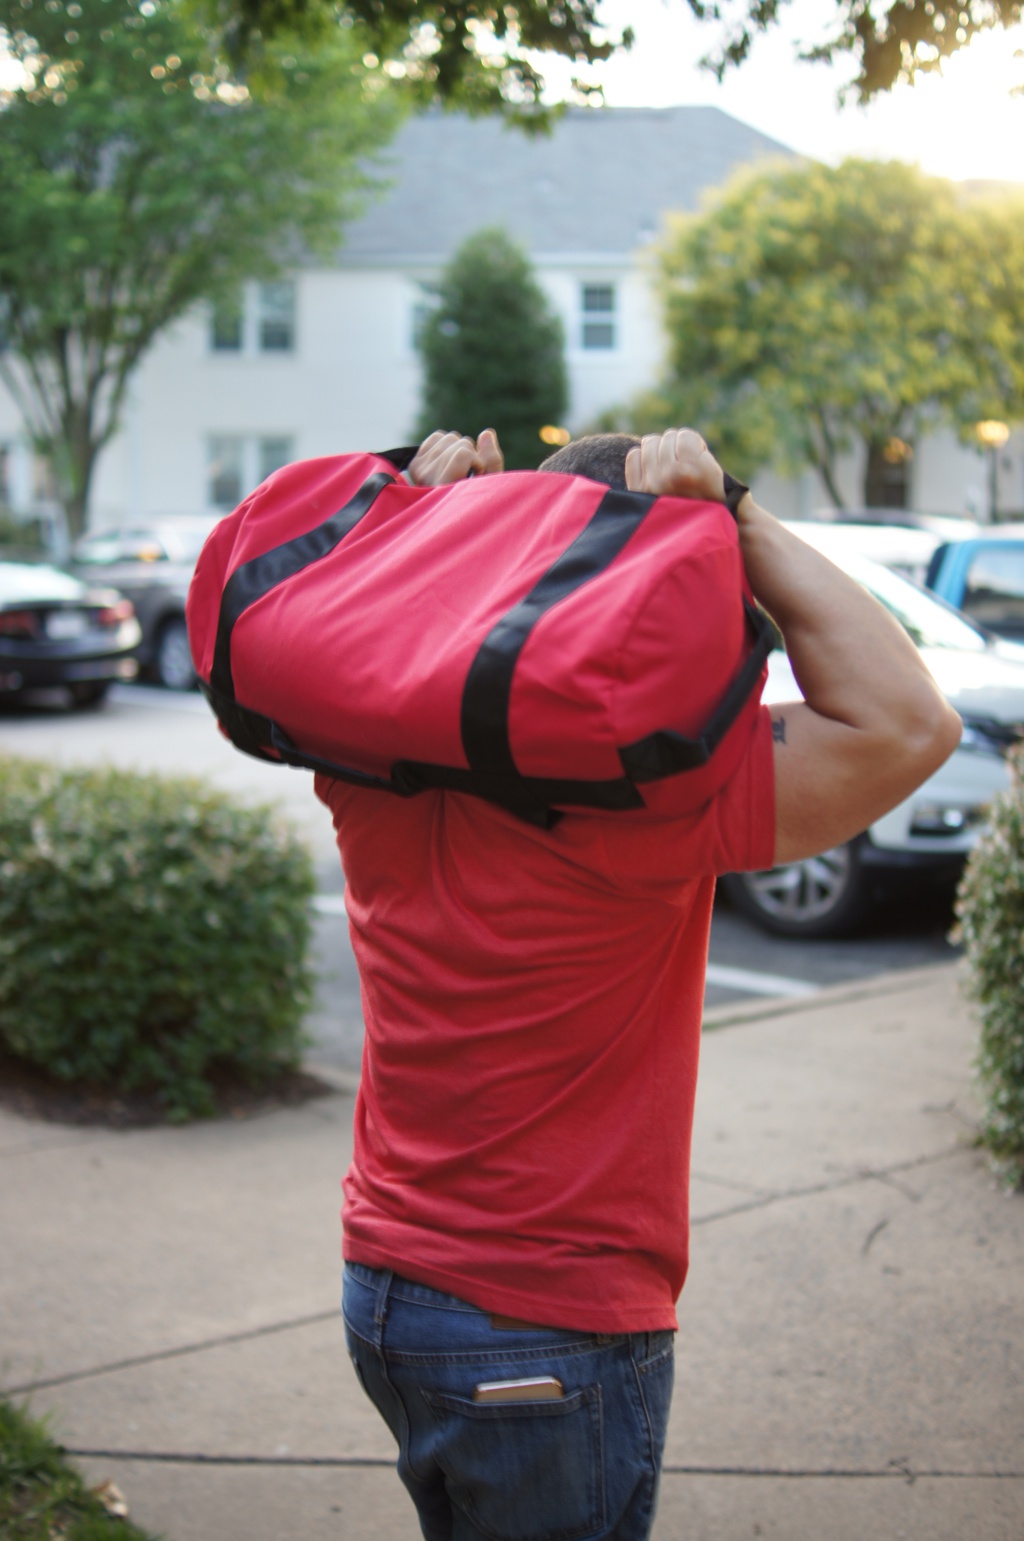 Rep Fitness How to Fill Your Sandbag Pinterest Image 1